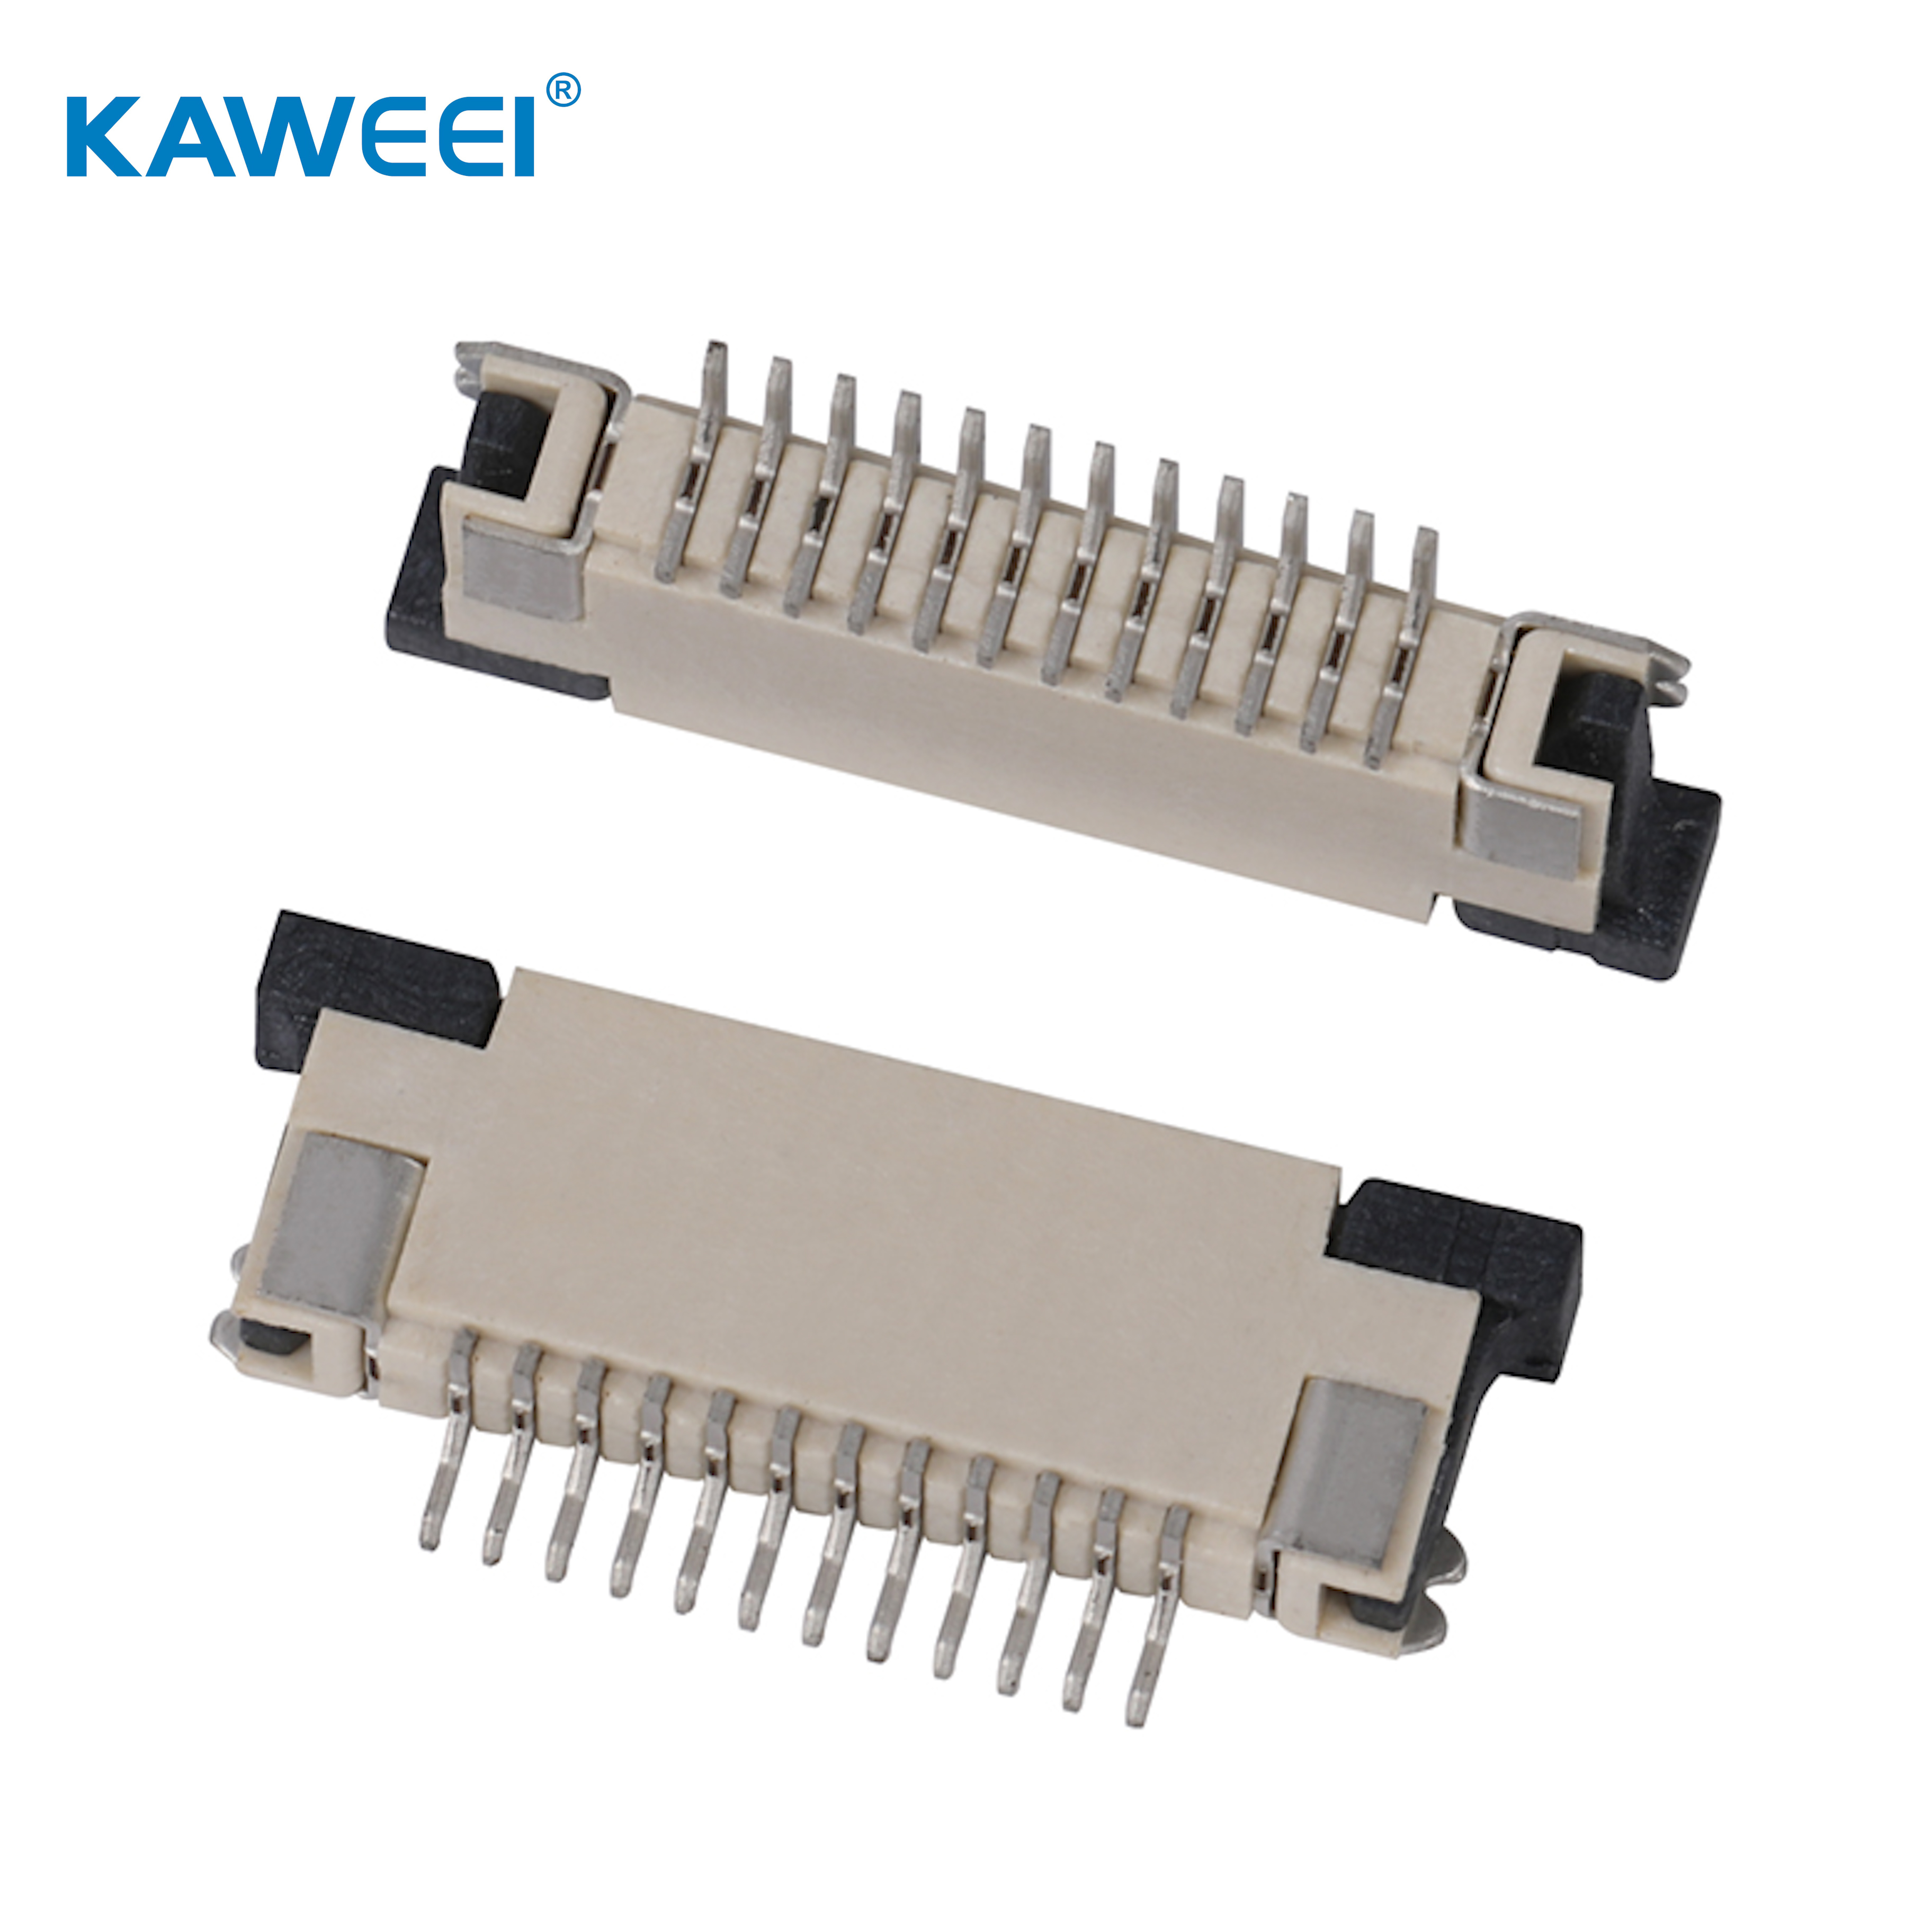 1.0mm pitch ffc/fpc pull type SMT upper contact connector wire to board connector